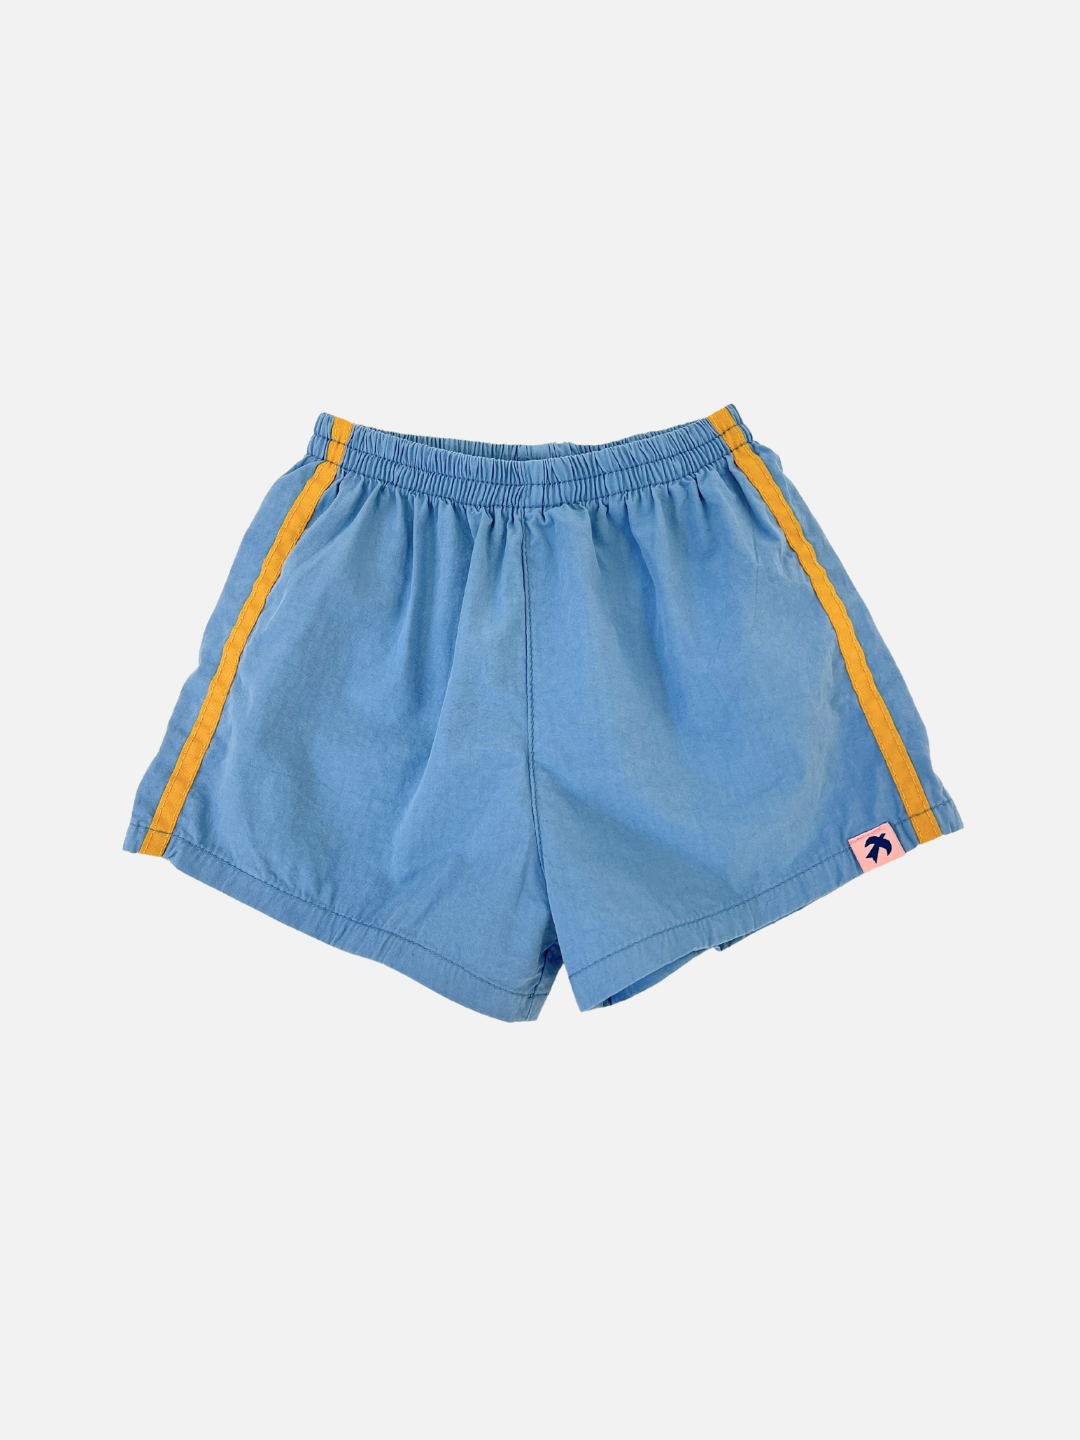 Front view of the kids' sky blue shorts with yellow stripes on the sides.